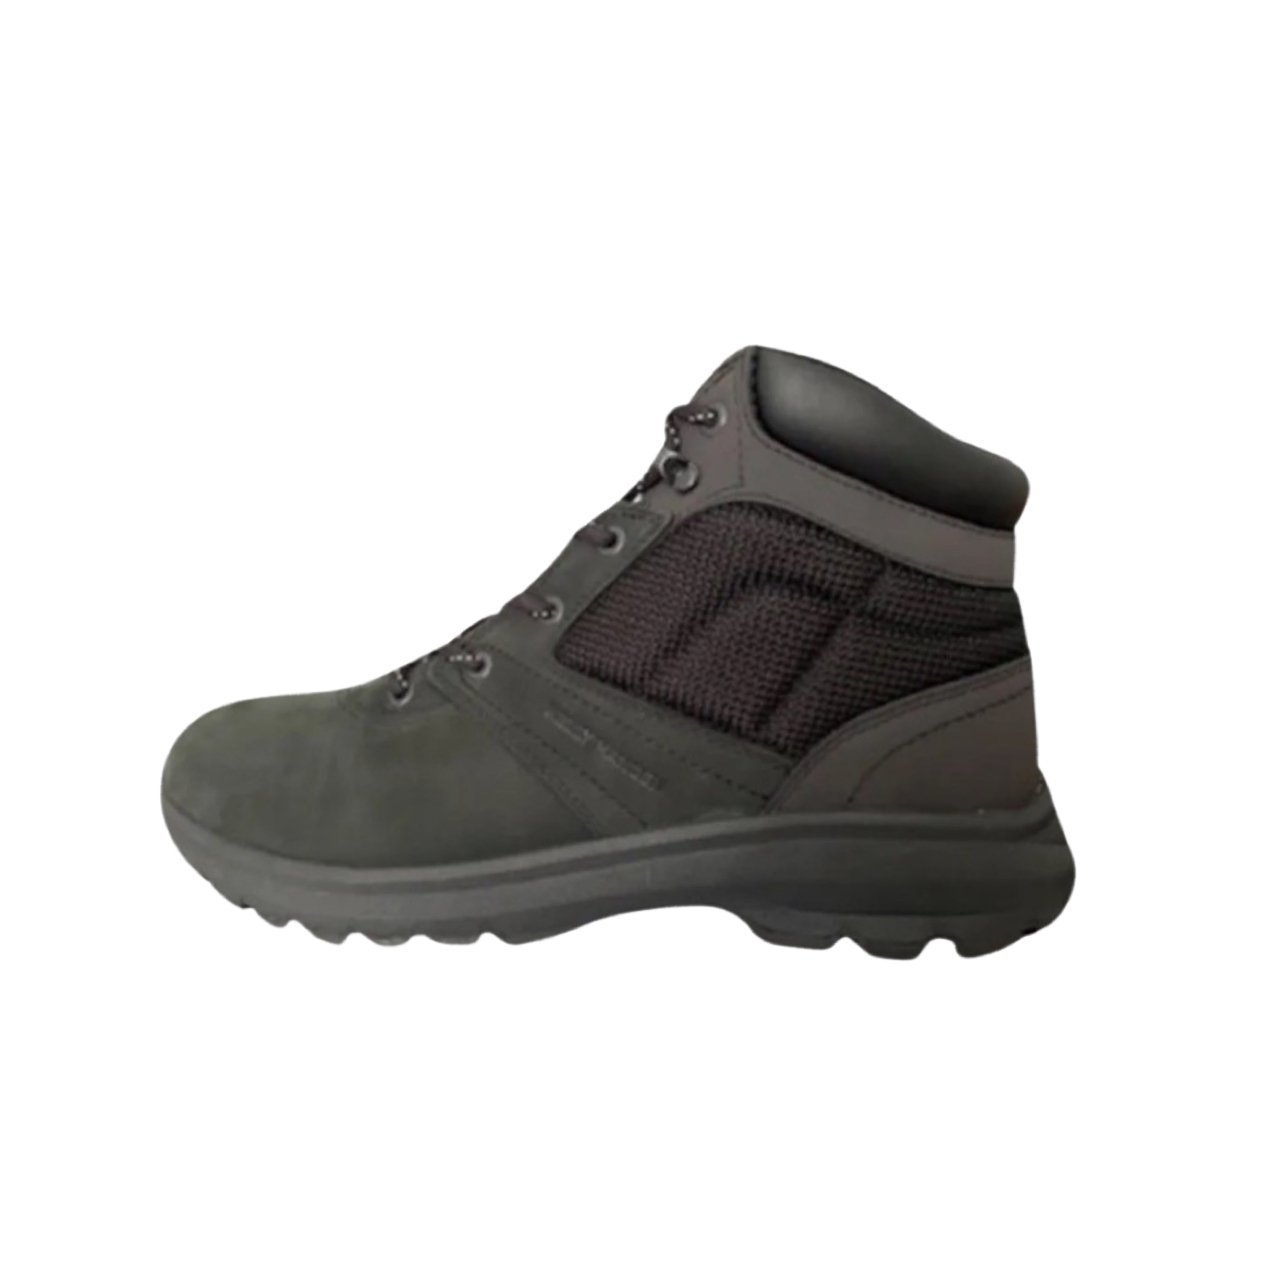 Helly Hansen Montreal V2 Waterproof Leather Boots with Grip - Soul and Sense Streetwear